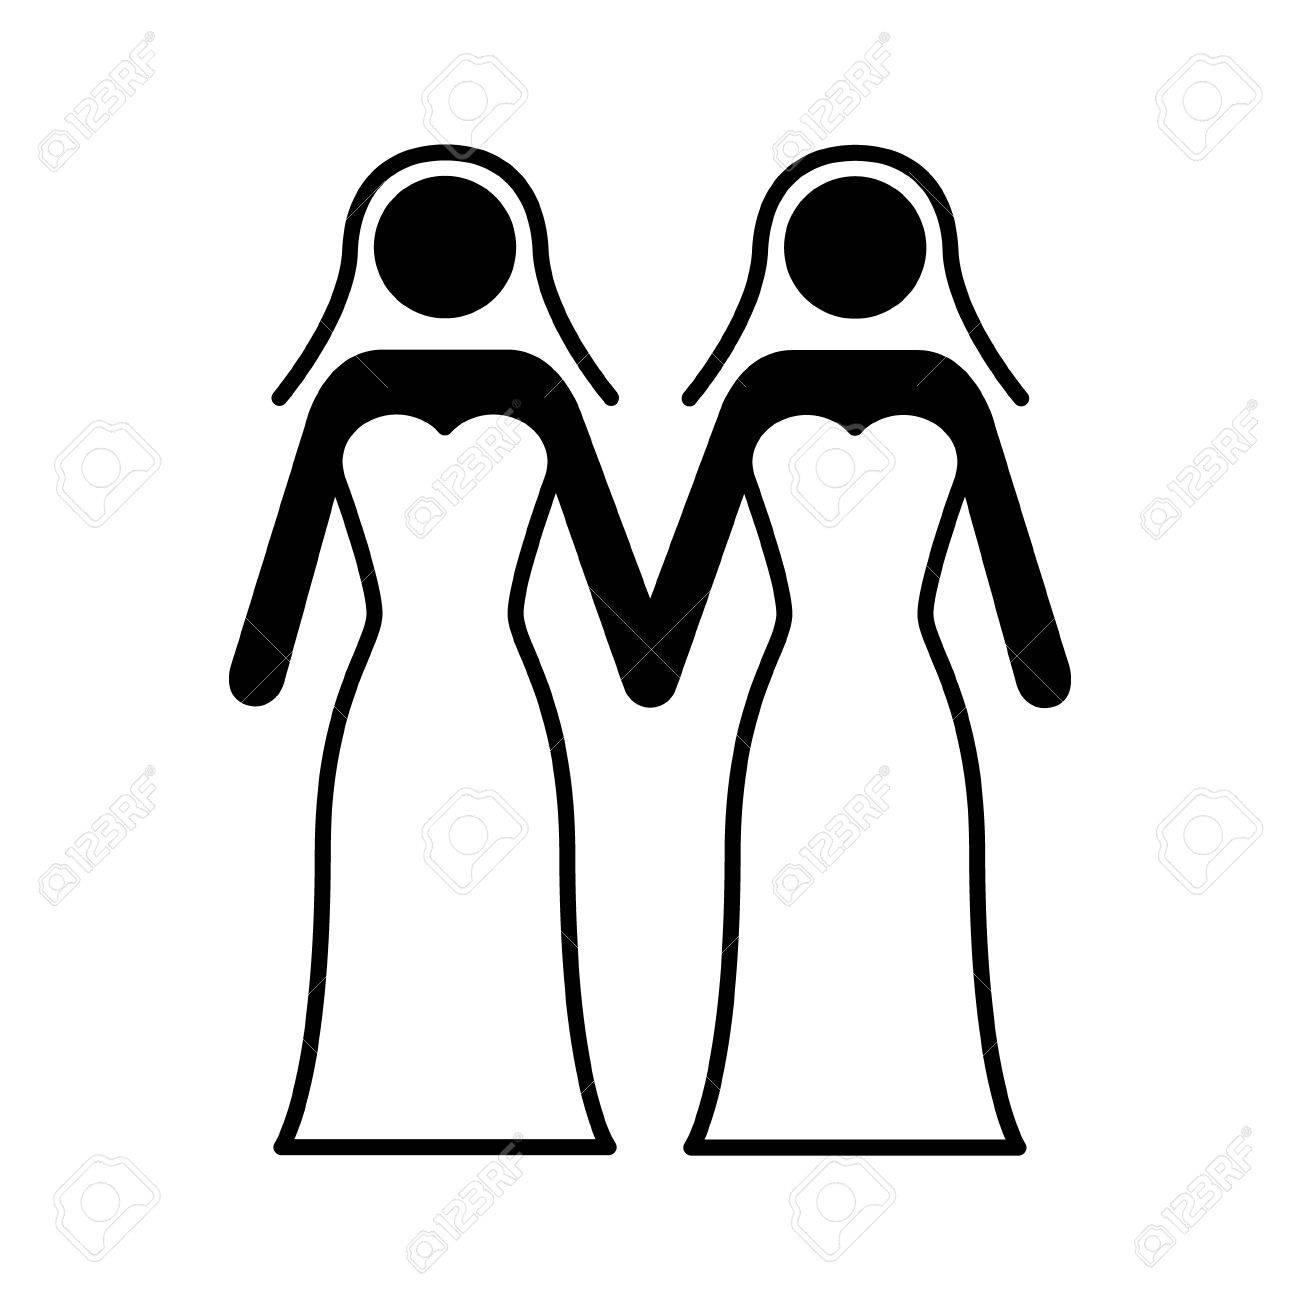 Gay marriage. Illustration of a gay couple dressed in stock 